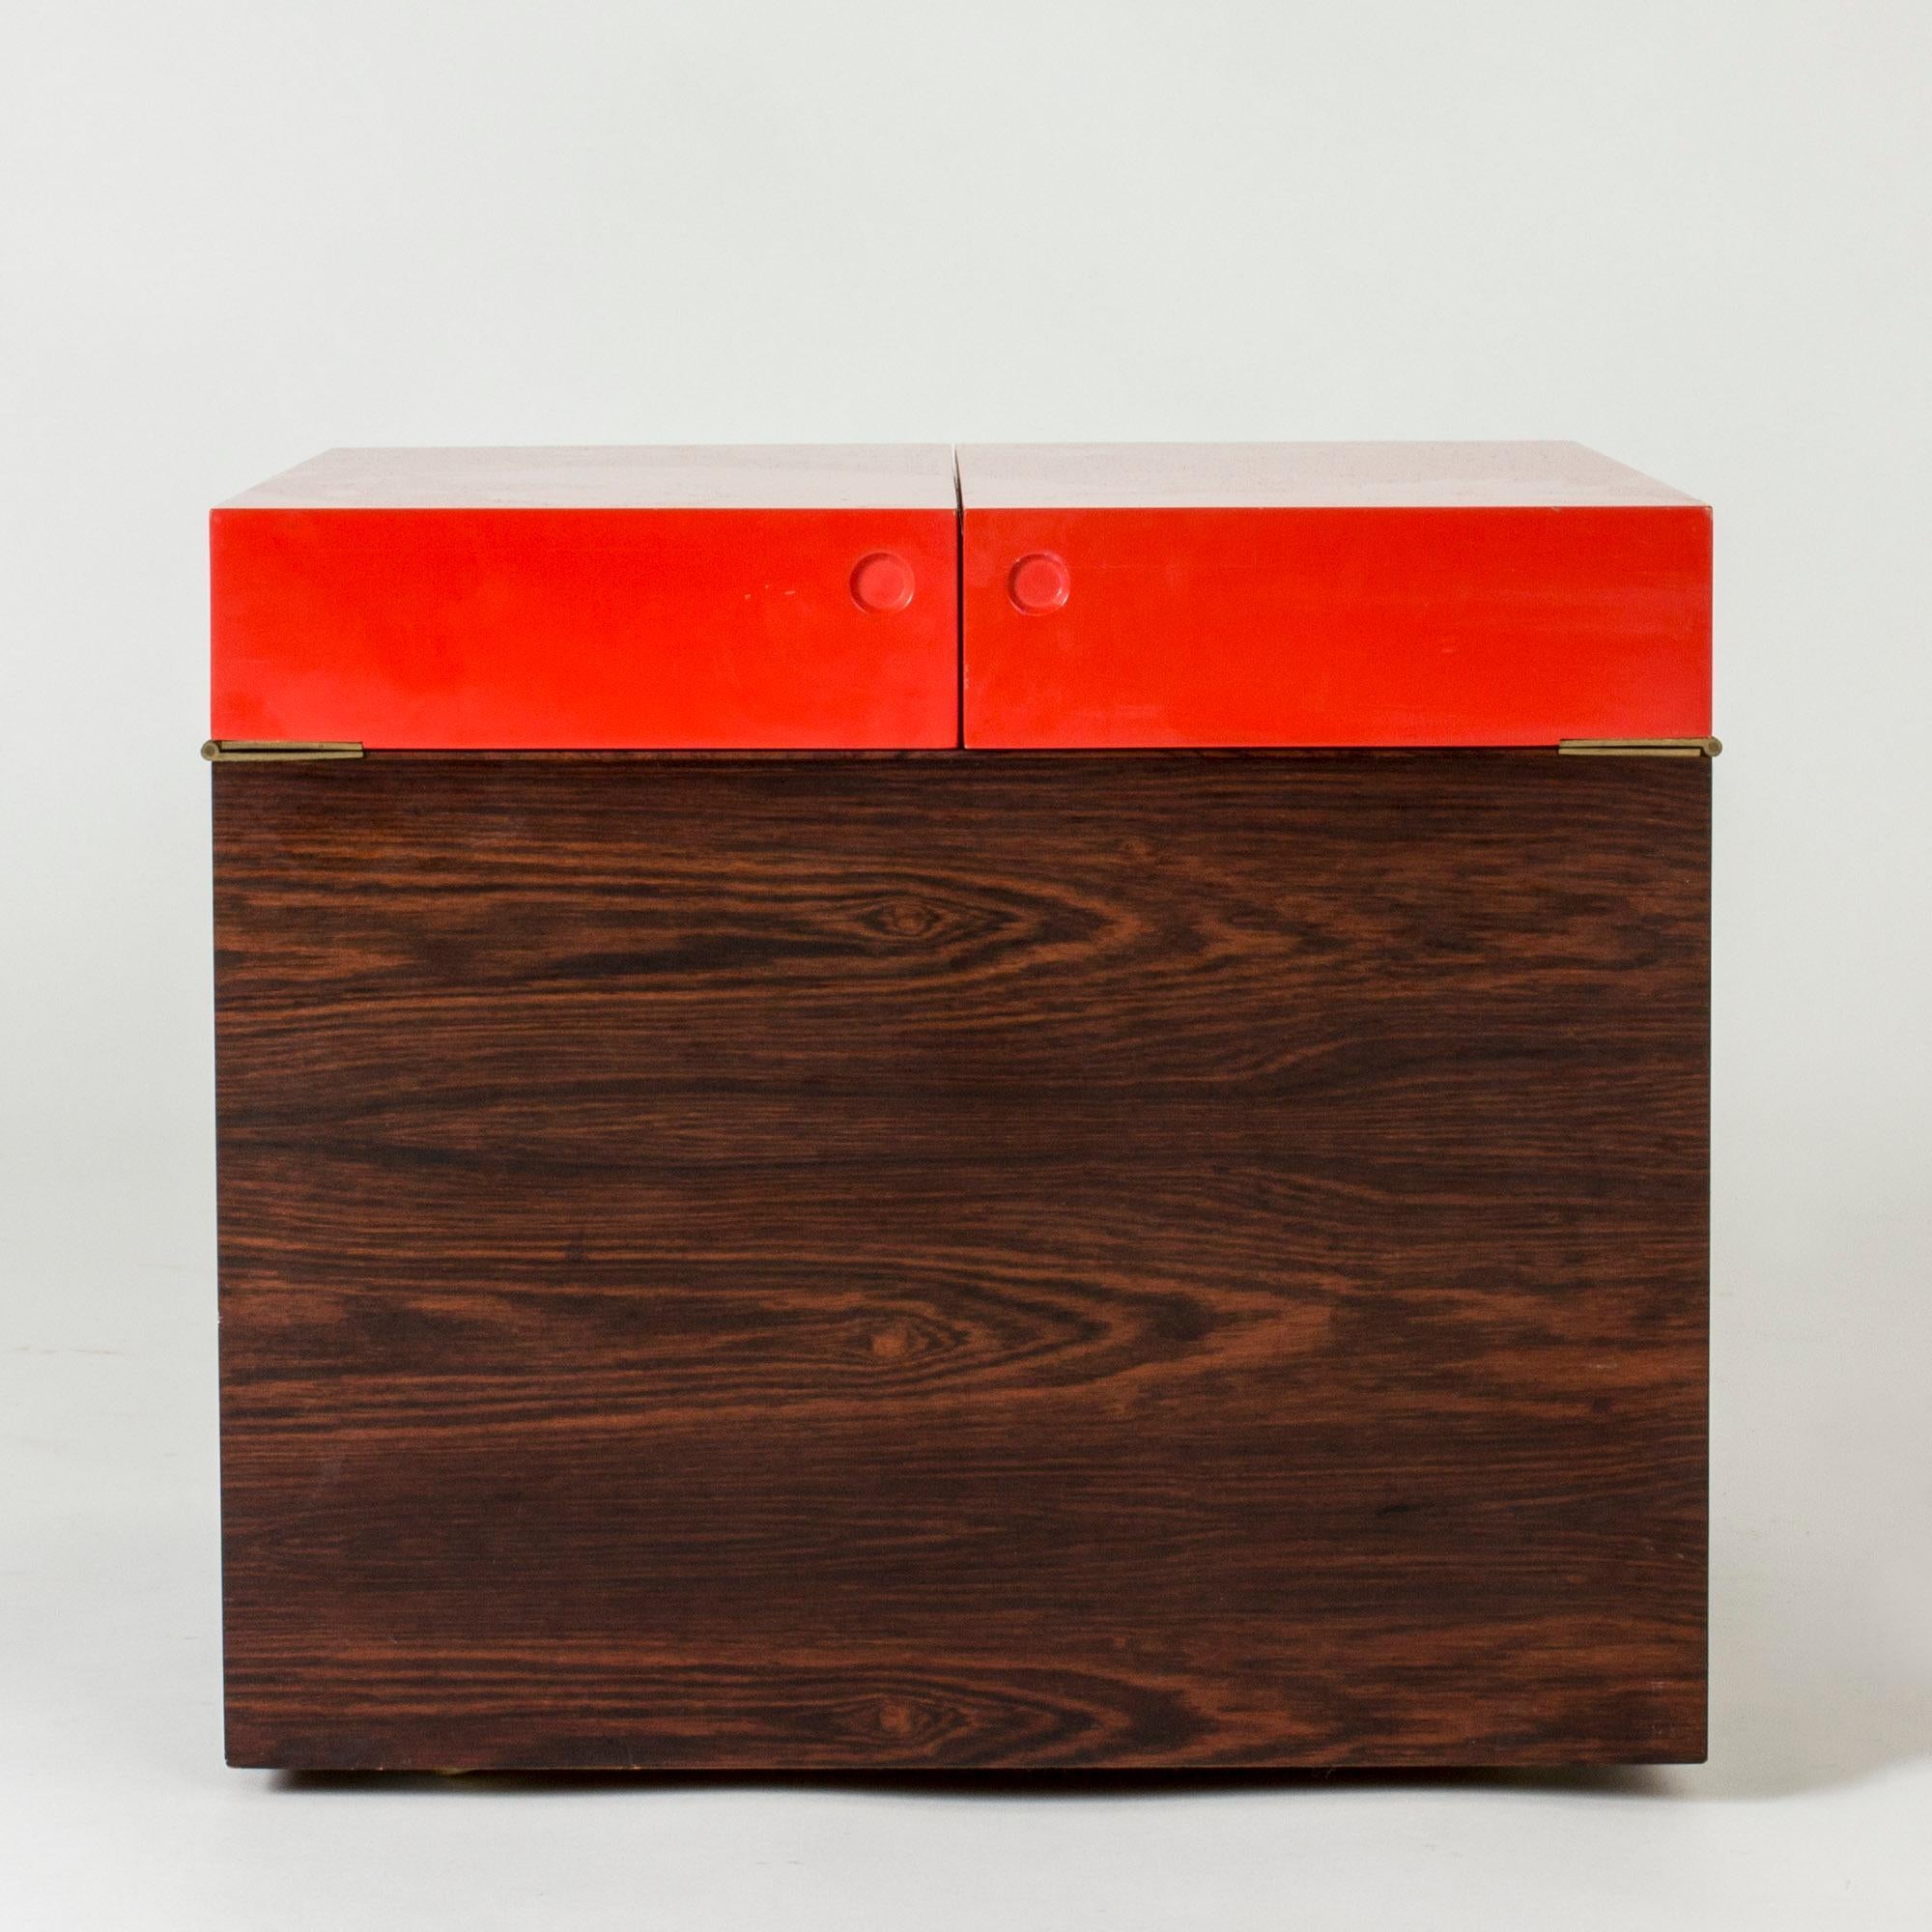 Amazing cubical bar cabinet on wheels by Sven Engström and Gunnar Myrstrand. Made from rosewood with the upper part lacquered red. Inside with compartments, removable tray.